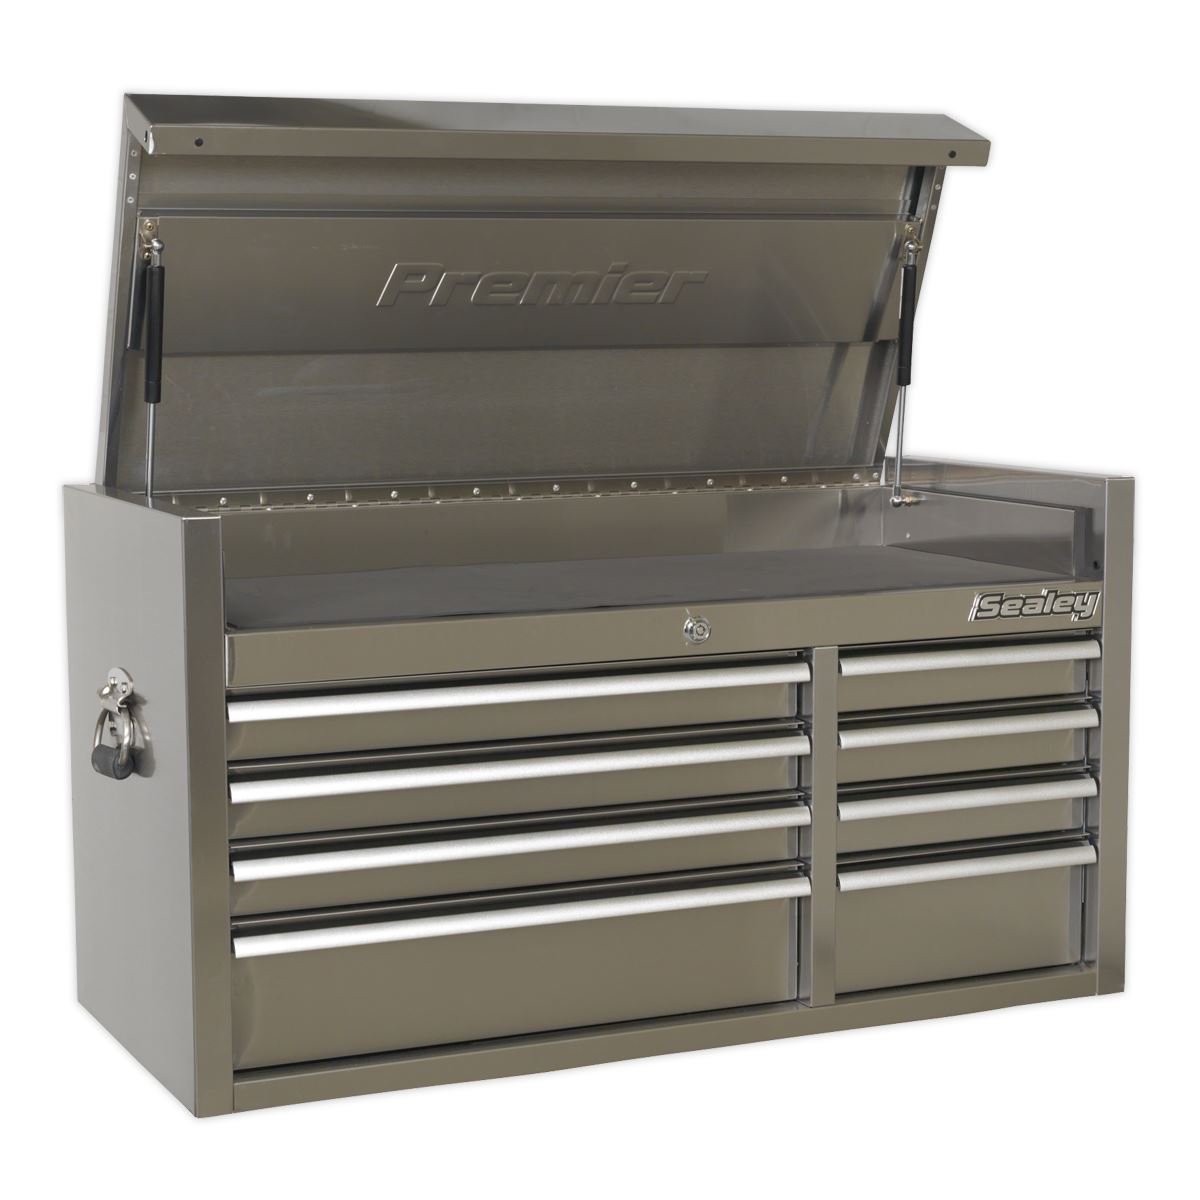 Sealey Premier Topchest 8 Drawer 1055mm Extra-Wide Stainless Steel Heavy-Duty